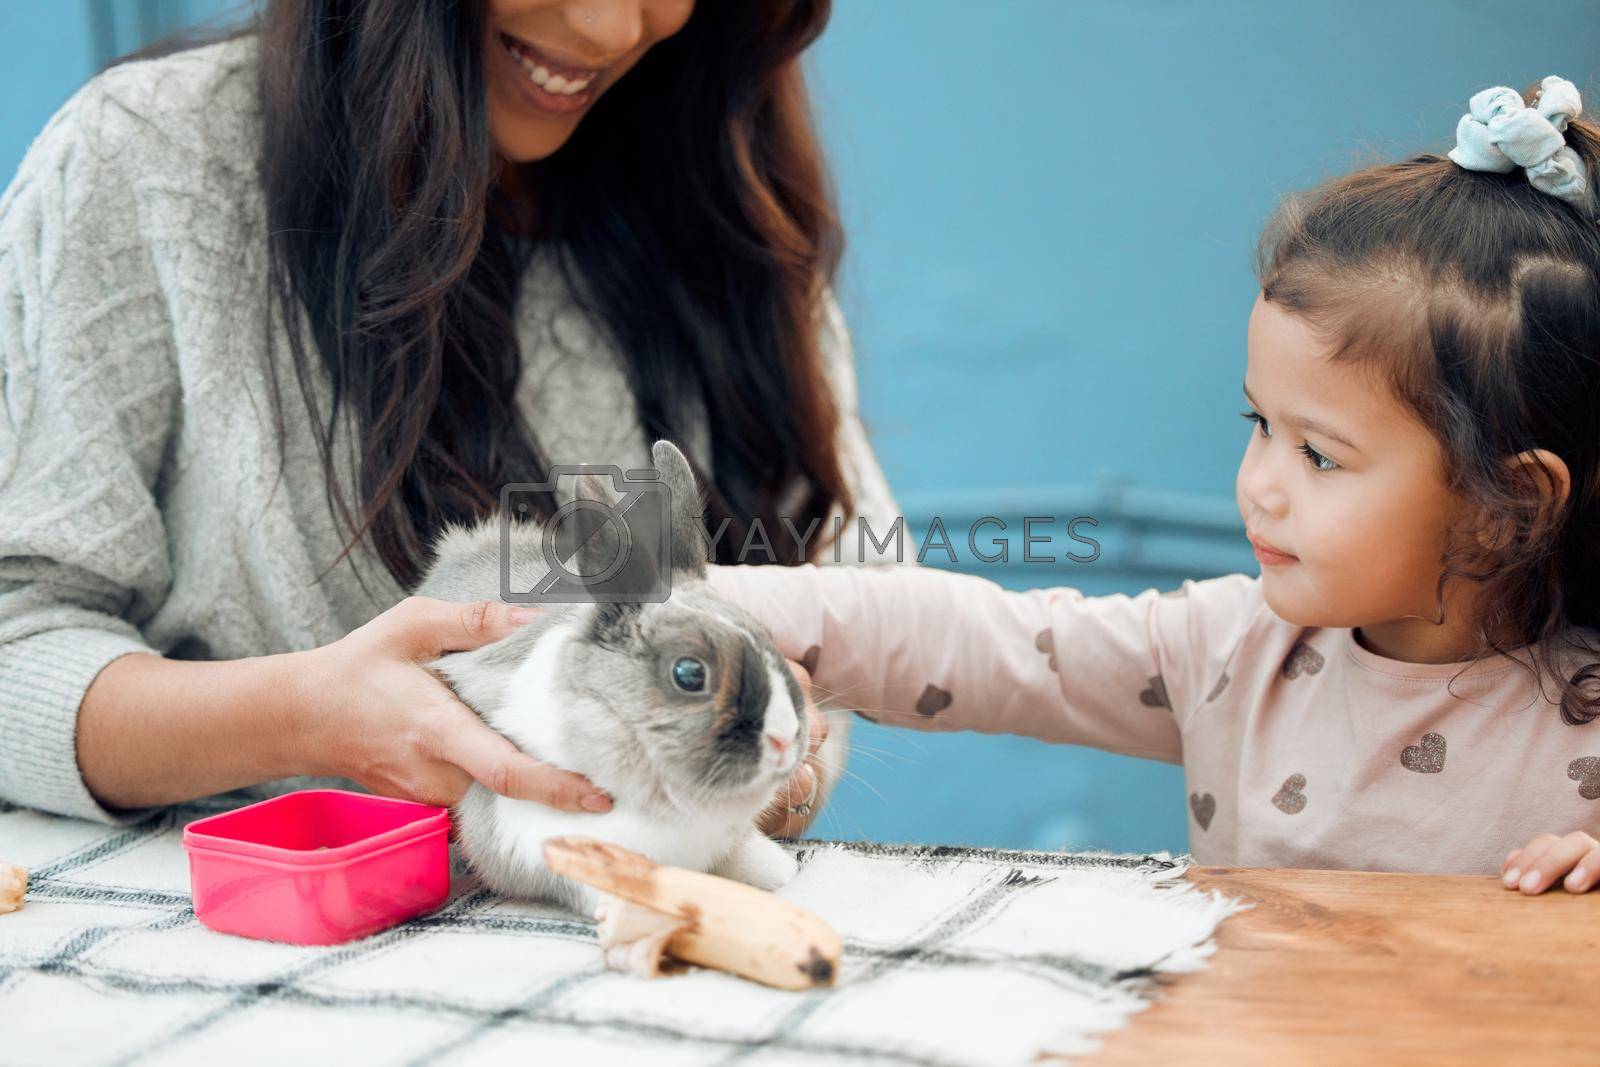 Royalty free image of Pet him gently. Shot of a mother and daughter feeding their pet rabbit at home. by YuriArcurs